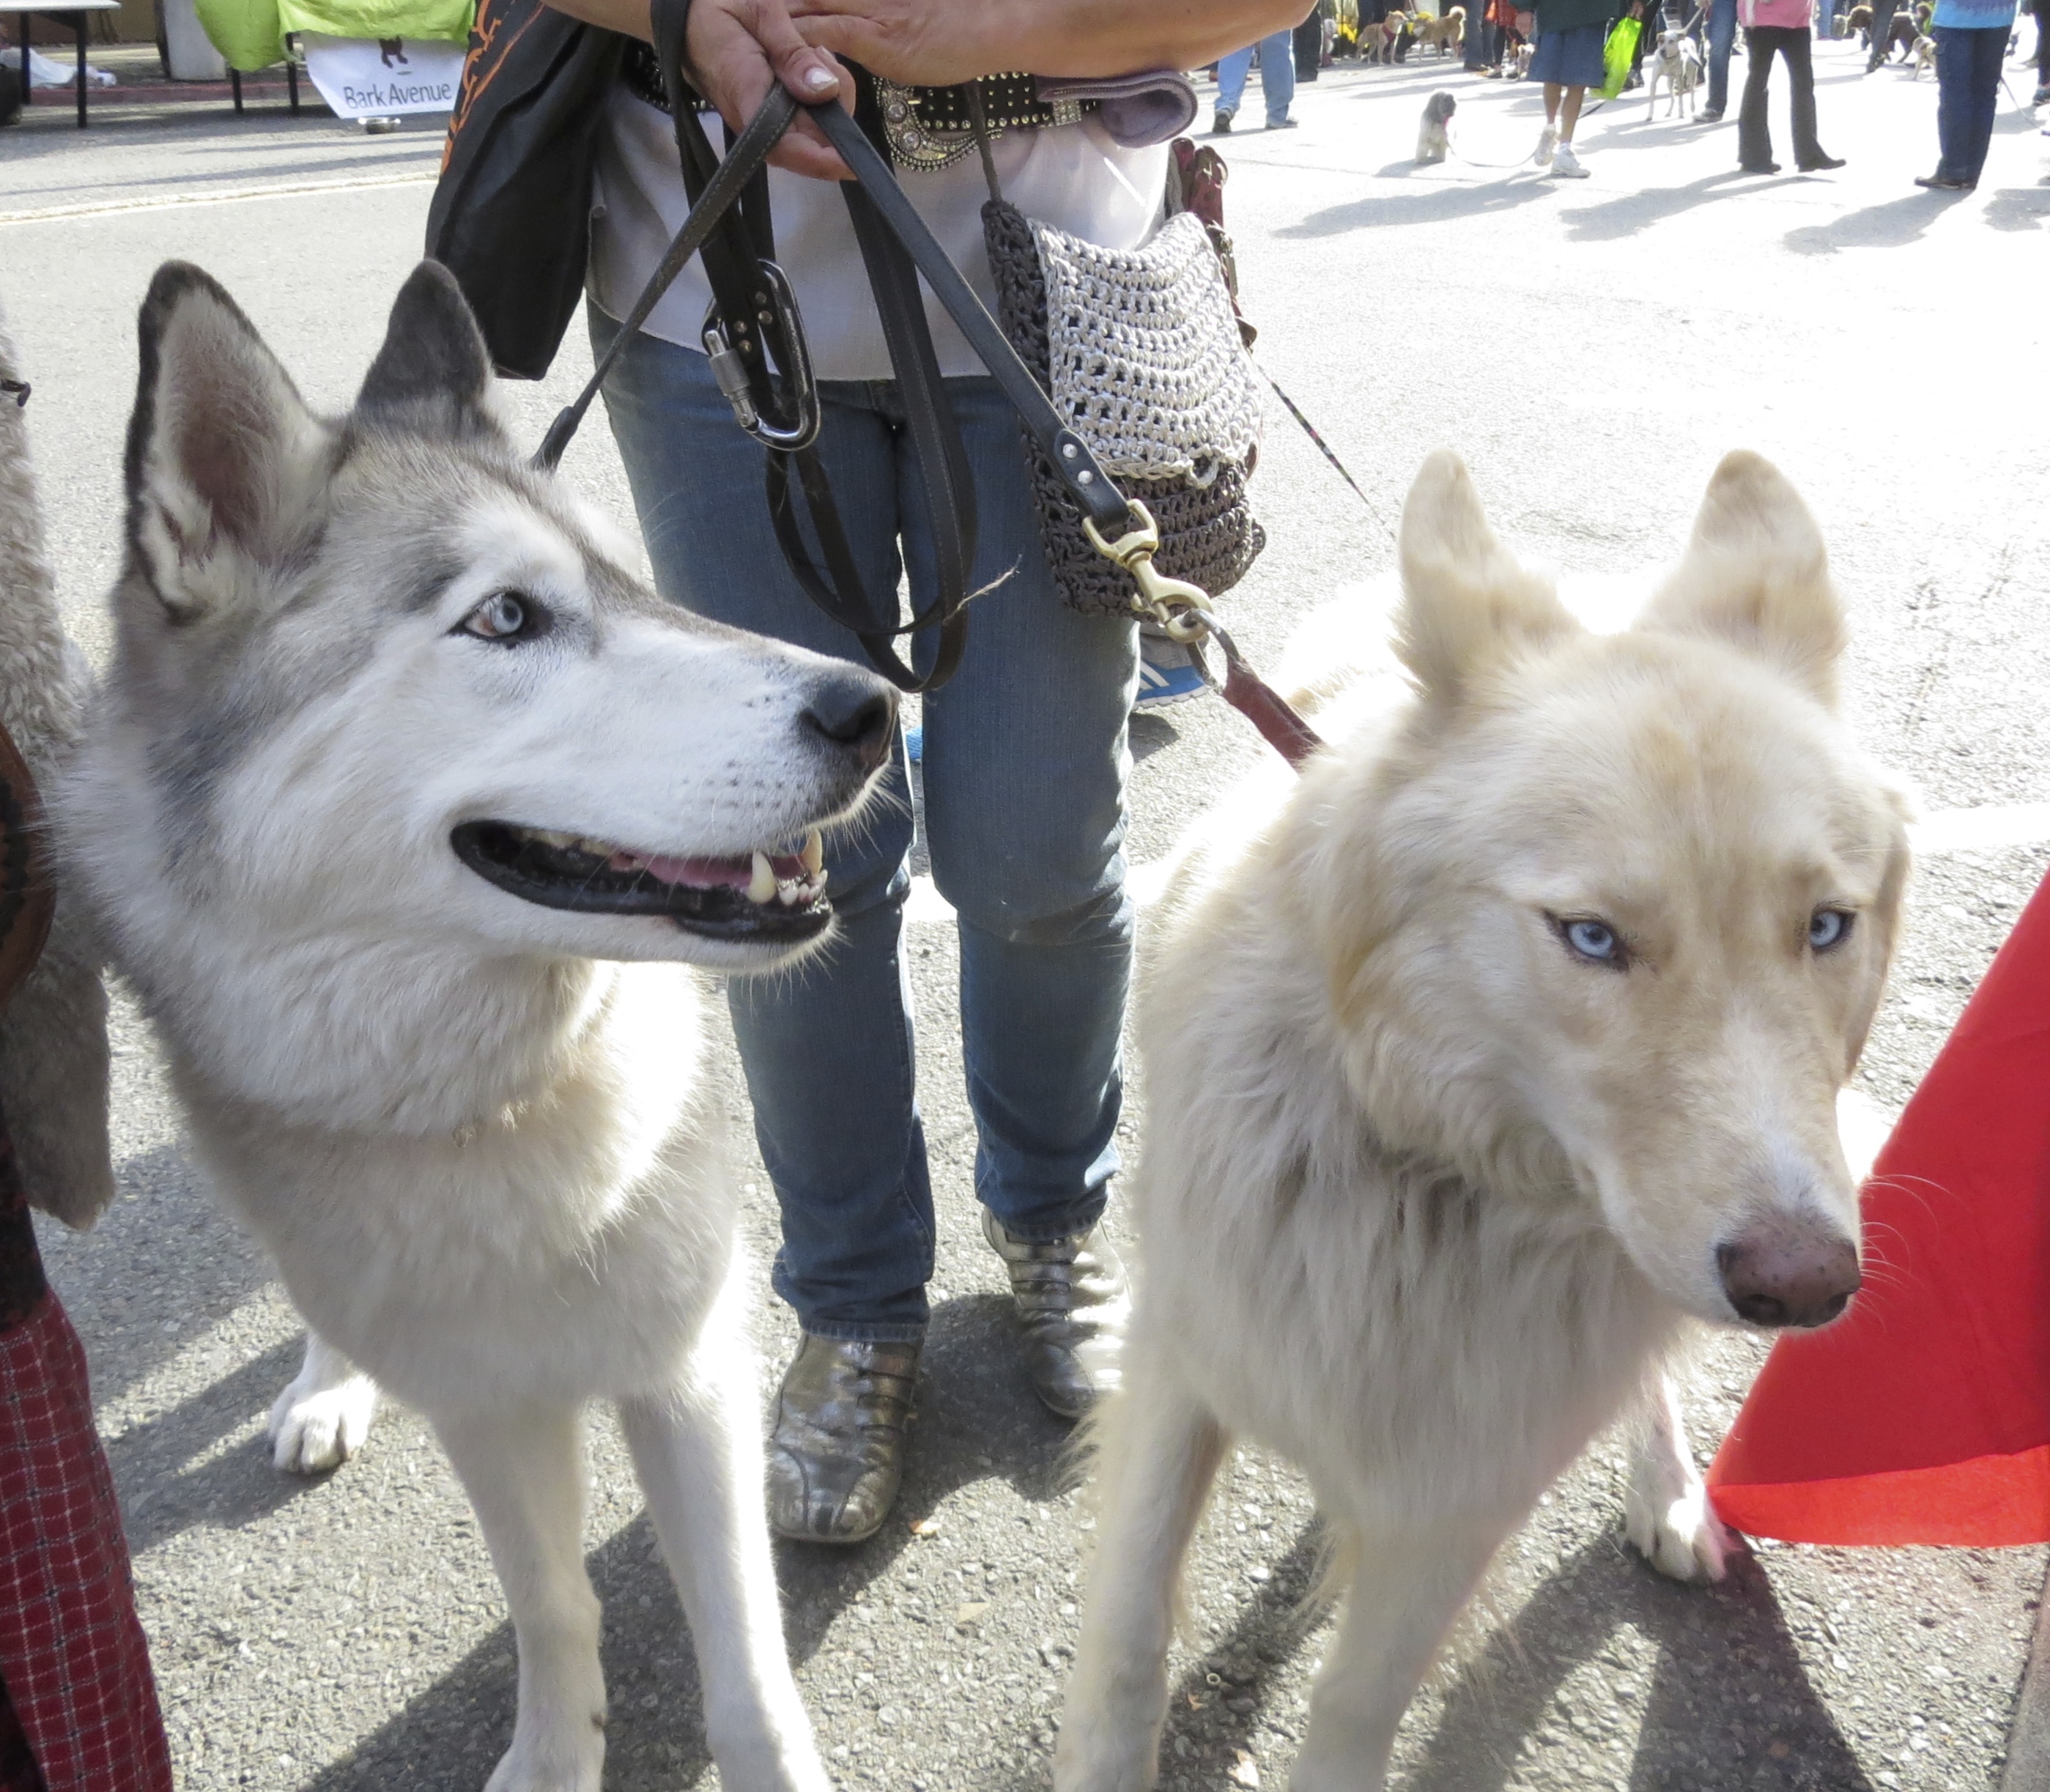 Silver-and-Whte Siberian Husky and Very Light Blonde Siberian Husky (Mix?)